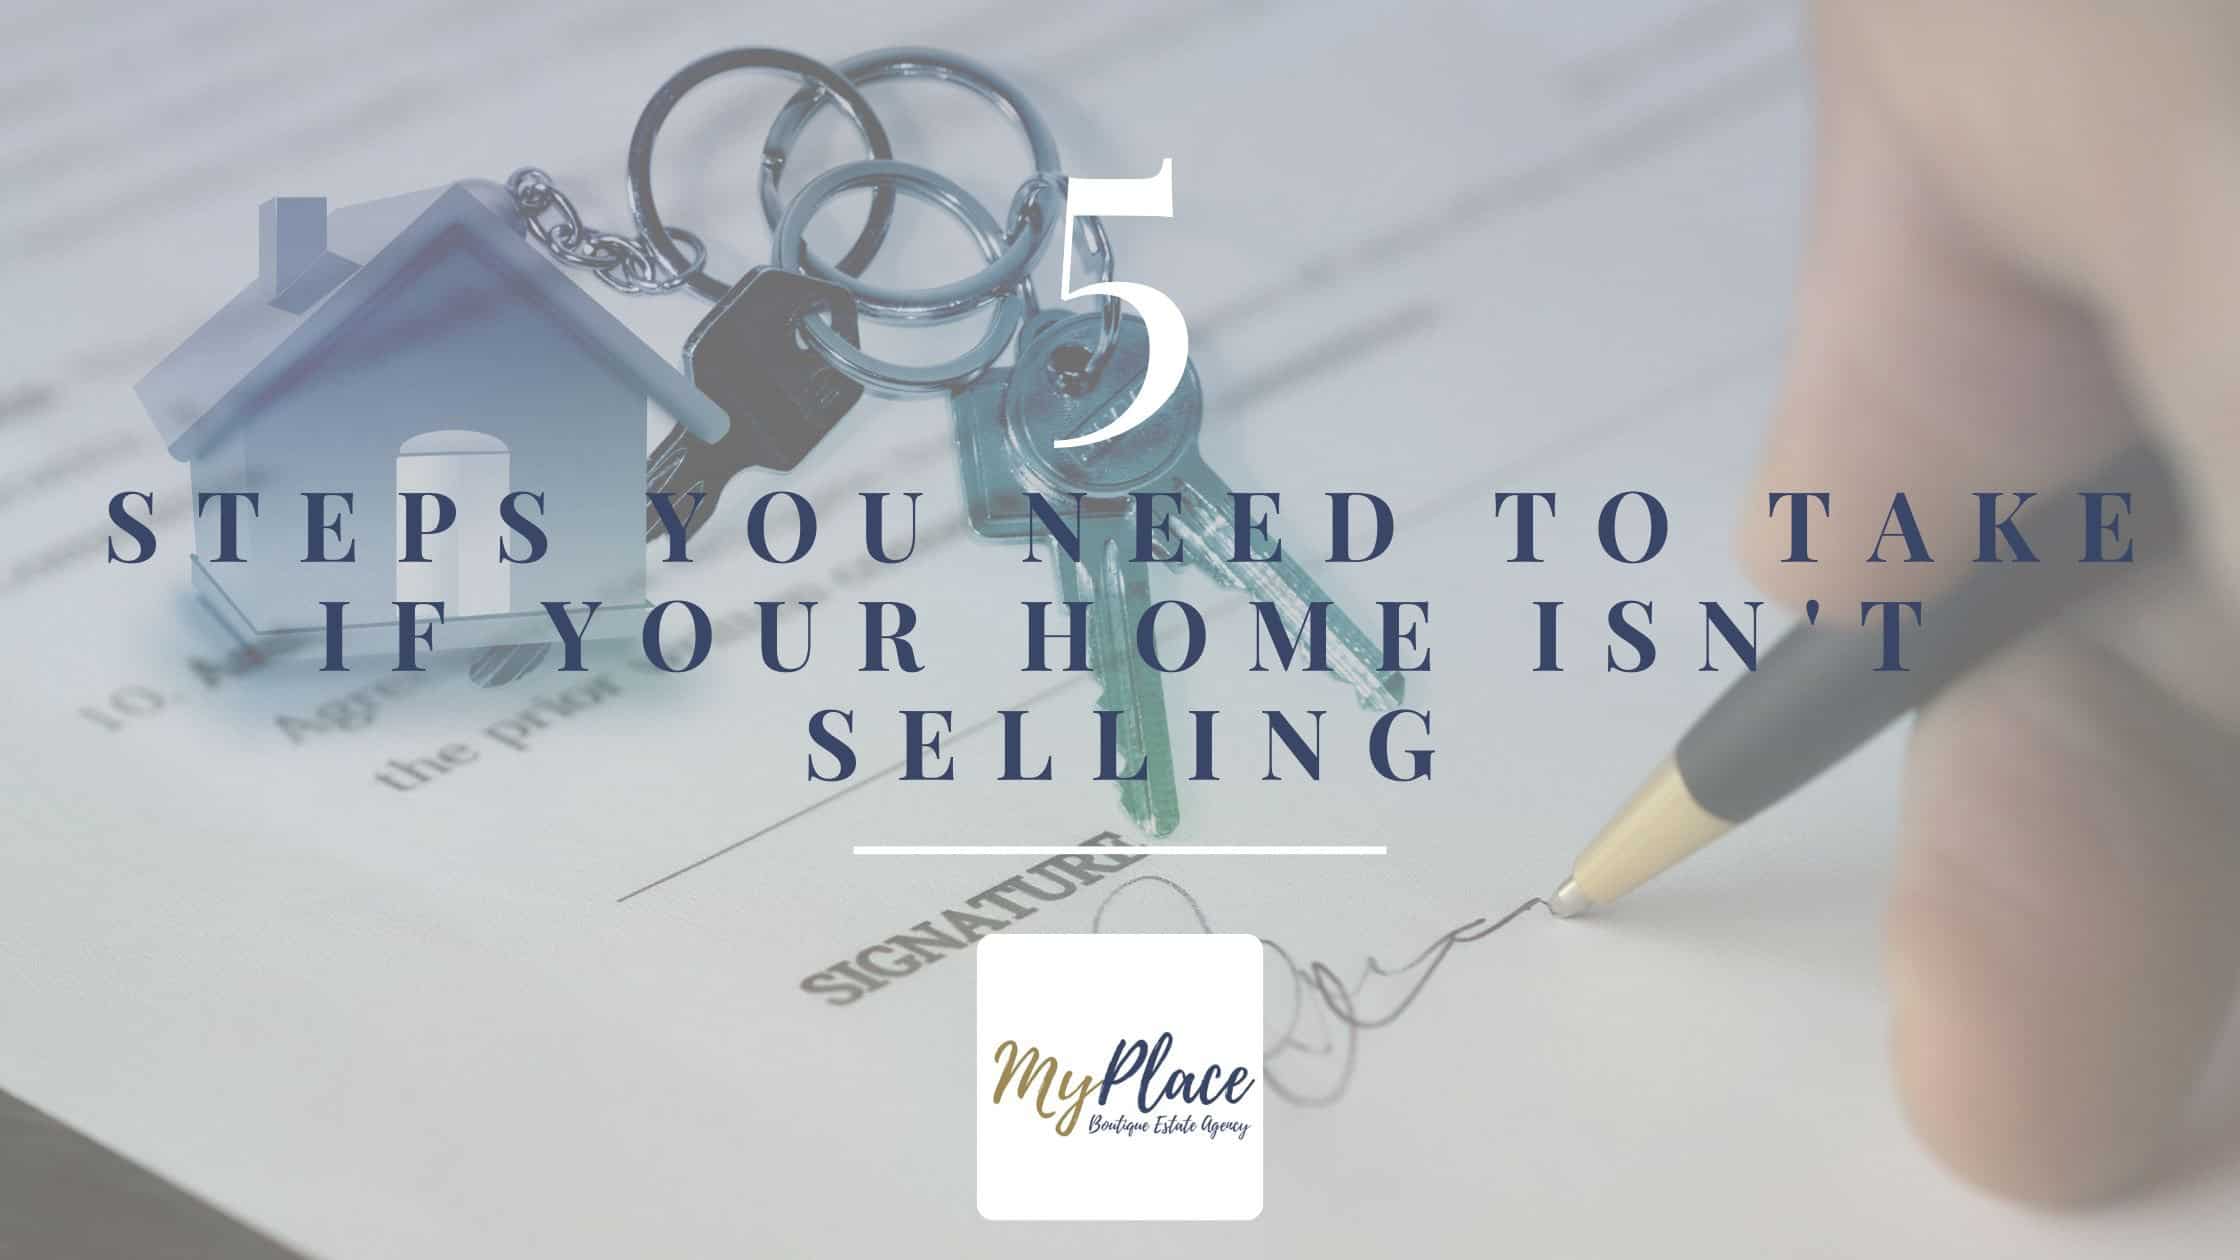 5 Steps to take if your home isn’t selling